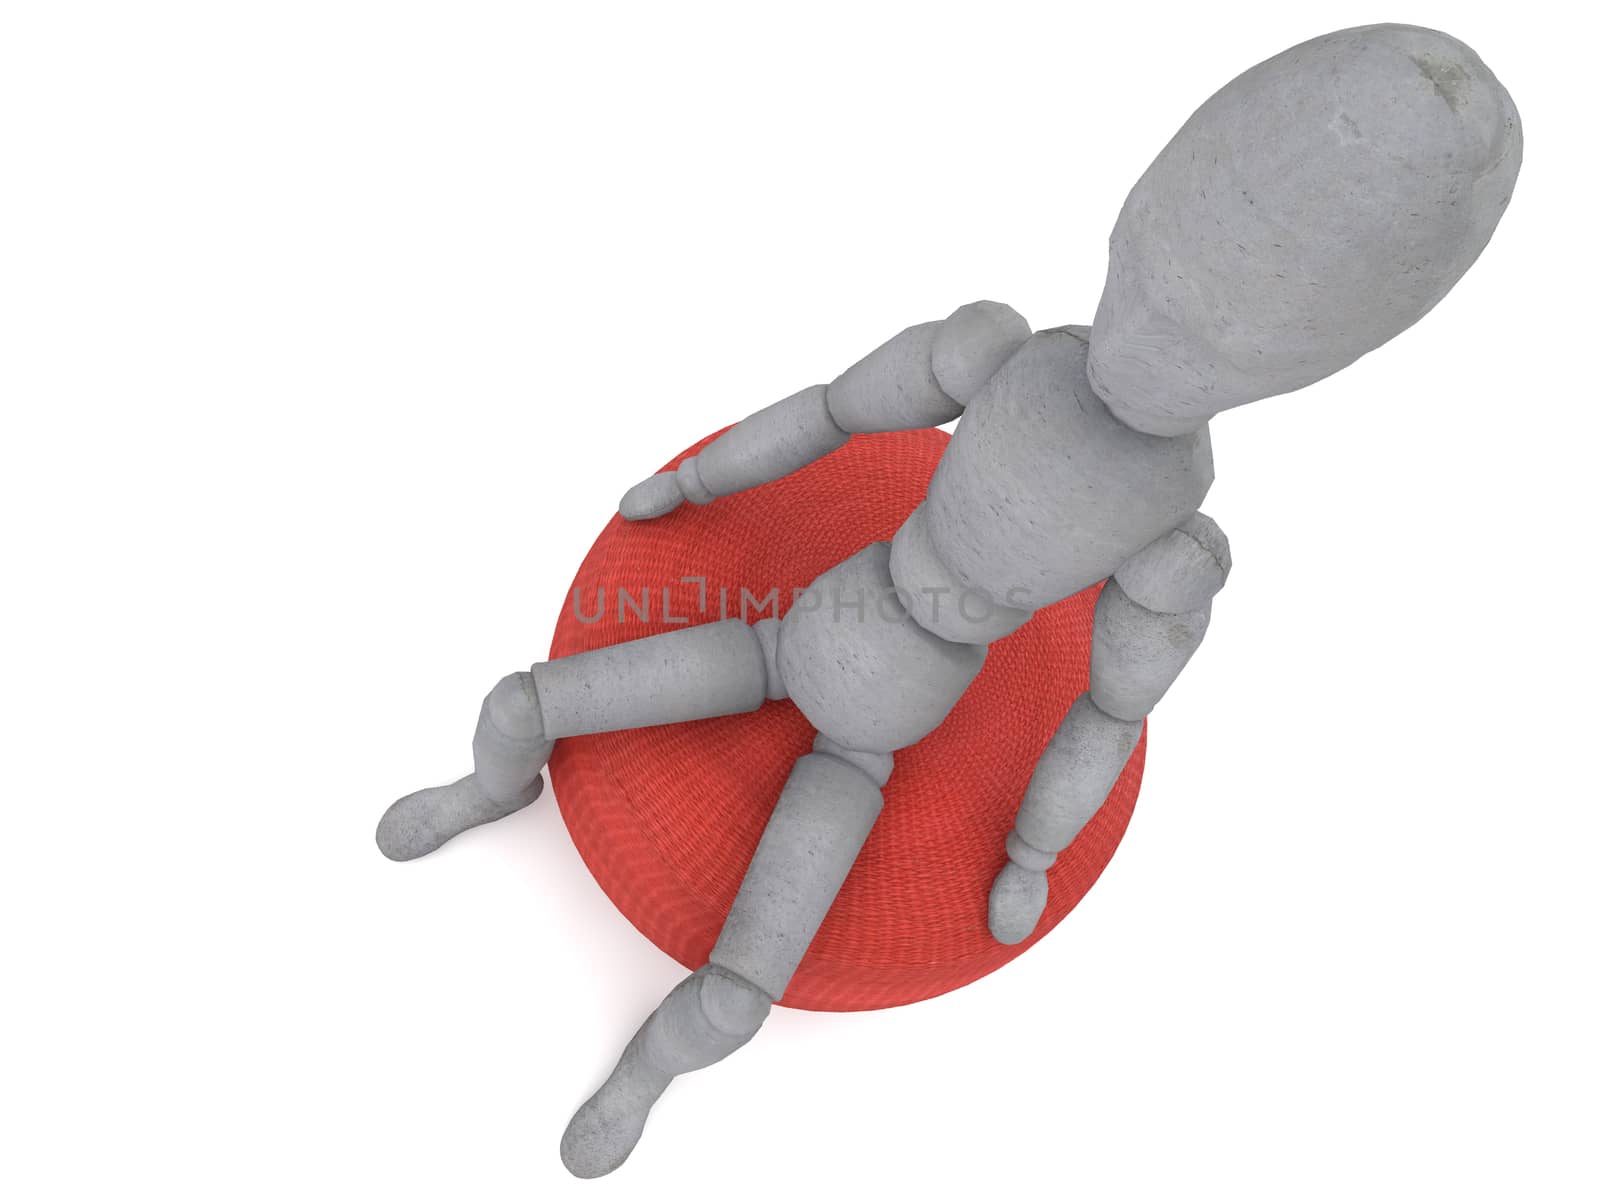 3d puppet model figure with a detached view of a slightly tilted head is sitting on a red sofa chair from different angles. great image to illustrate the problems in life or thinking